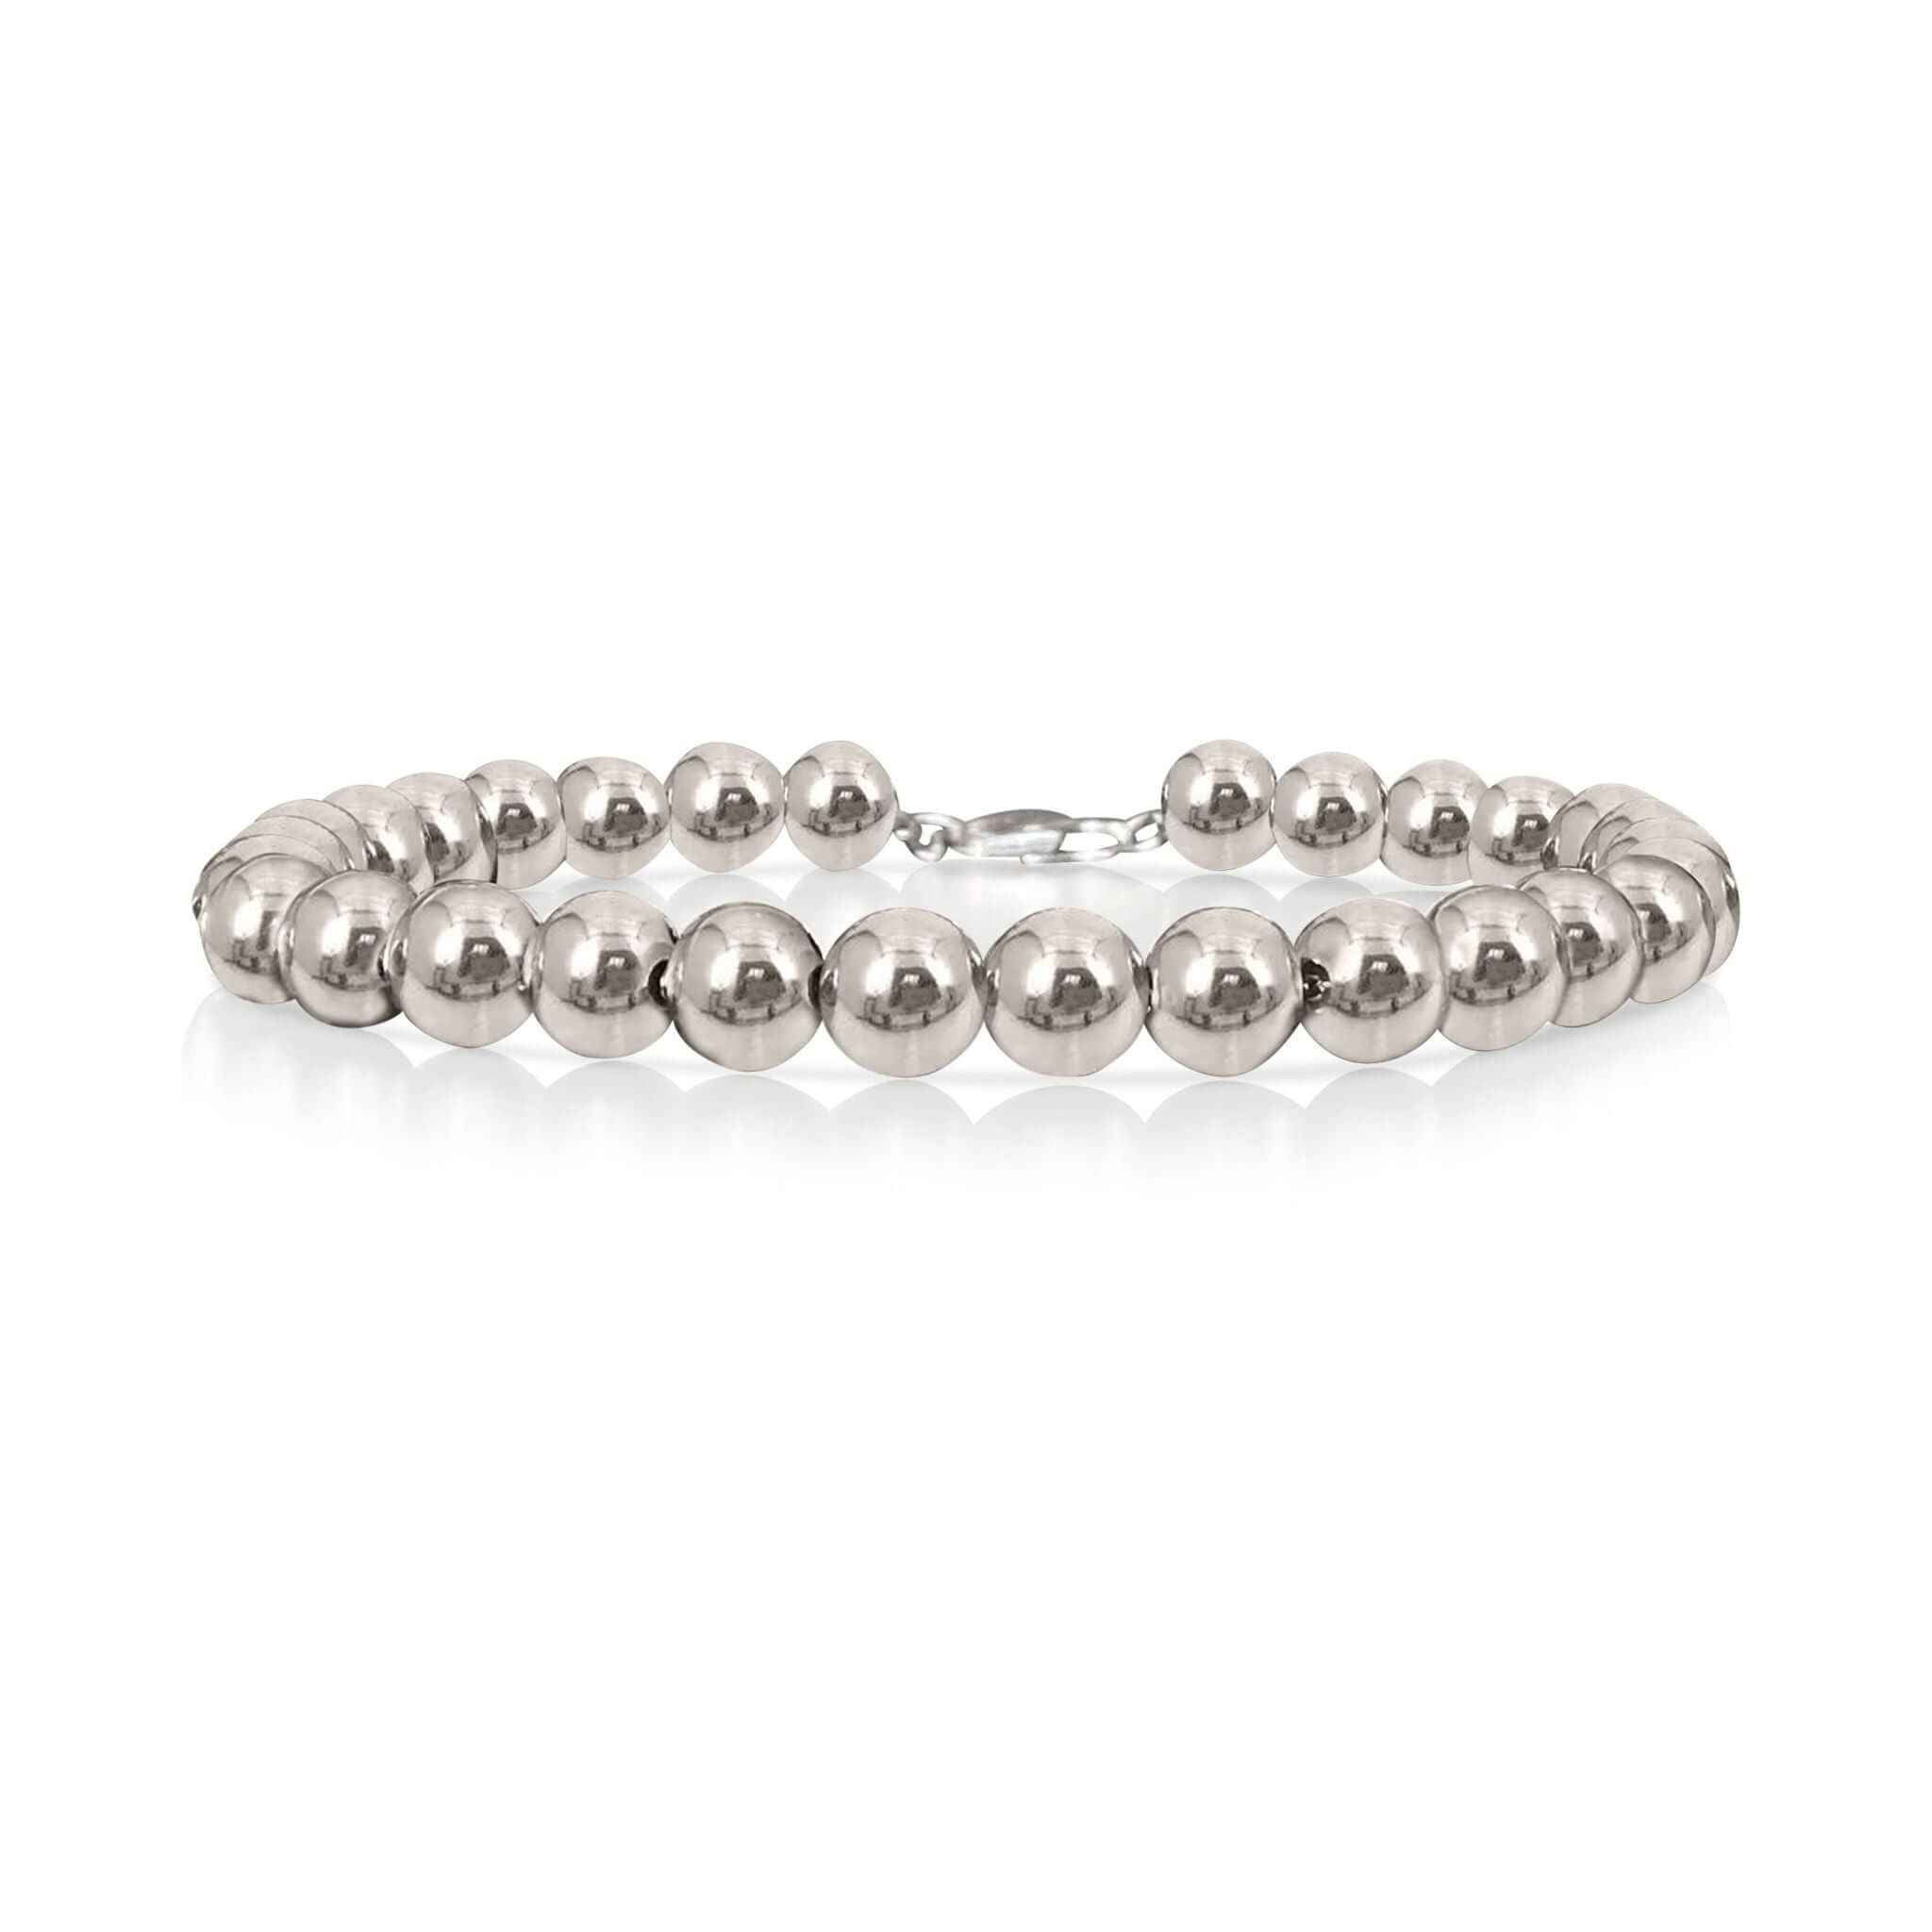 Exquisite 6mm Sterling Silver Beaded Bracelet - elegant and timeless jewelry piece by Alessandra James